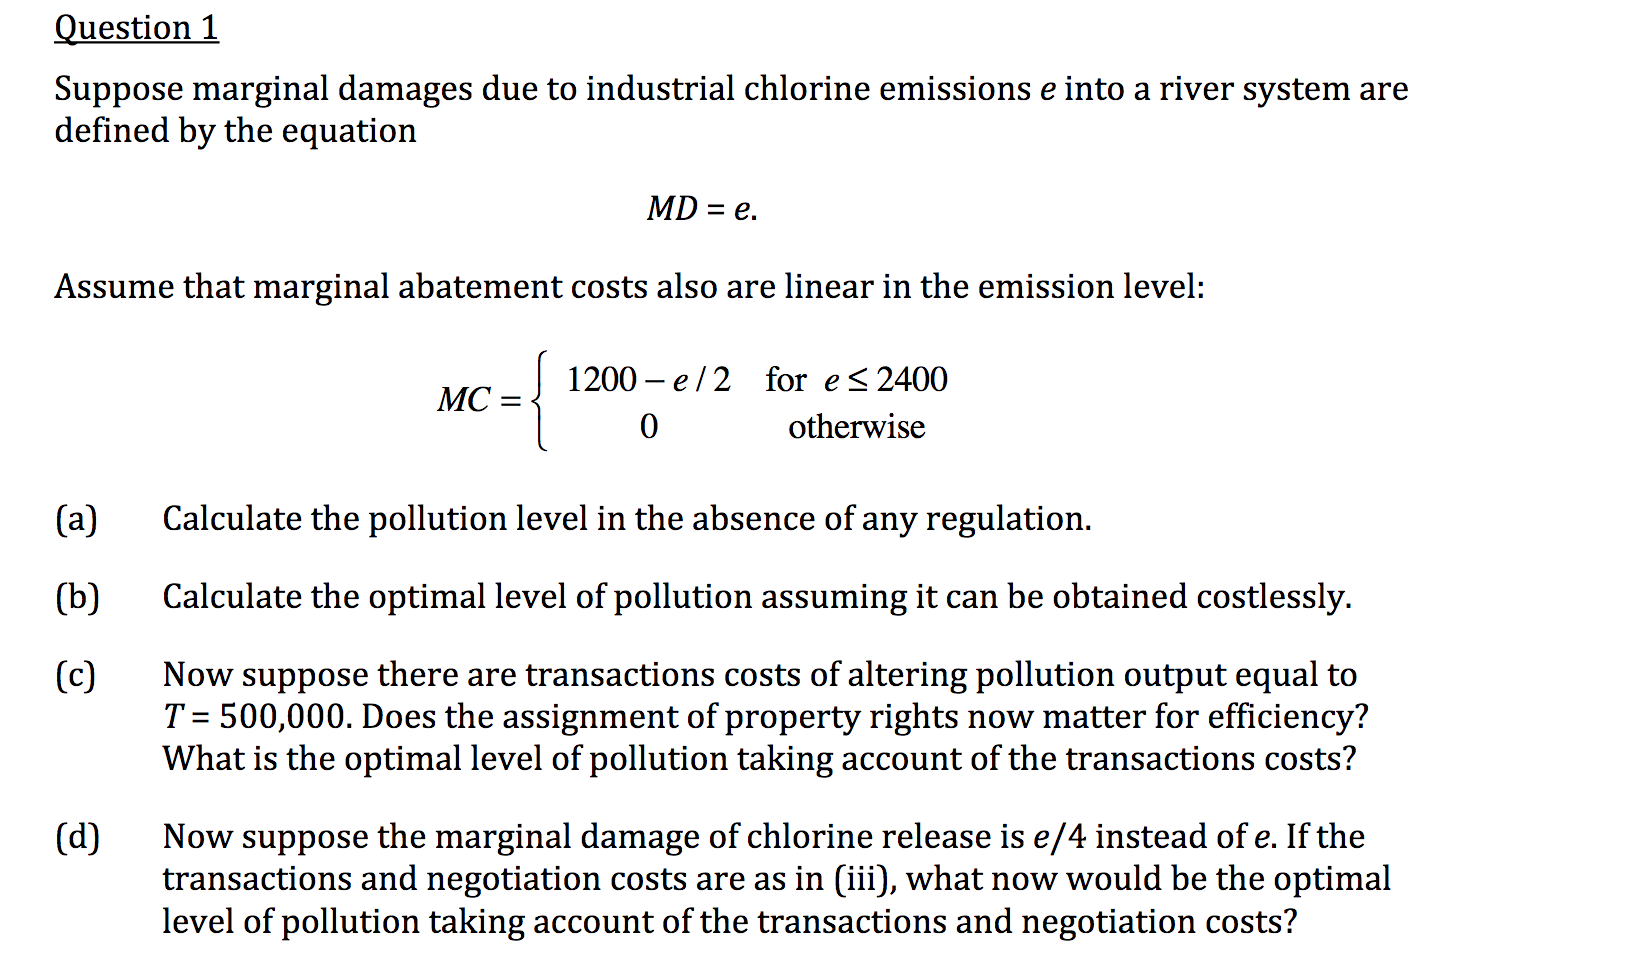 Suppose marginal damages due to industrial chlorine emissions e into a river system are
defined by the equation
MD = e.
Assume that marginal abatement costs also are linear in the emission level:
1200 – e/2 for e<2400
MC =
otherwise
(a)
Calculate the pollution level in the absence of any regulation.
(b)
Calculate the optimal level of pollution assuming it can be obtained costlessly.
Now suppose there are transactions costs of altering pollution output equal to
T = 500,000. Does the assignment of property rights now matter for efficiency?
What is the optimal level of pollution taking account of the transactions costs?
(c)
Now suppose the marginal damage of chlorine release is e/4 instead of e. If the
transactions and negotiation costs are as in (iii), what now would be the optimal
level of pollution taking account of the transactions and negotiation costs?
(d)
